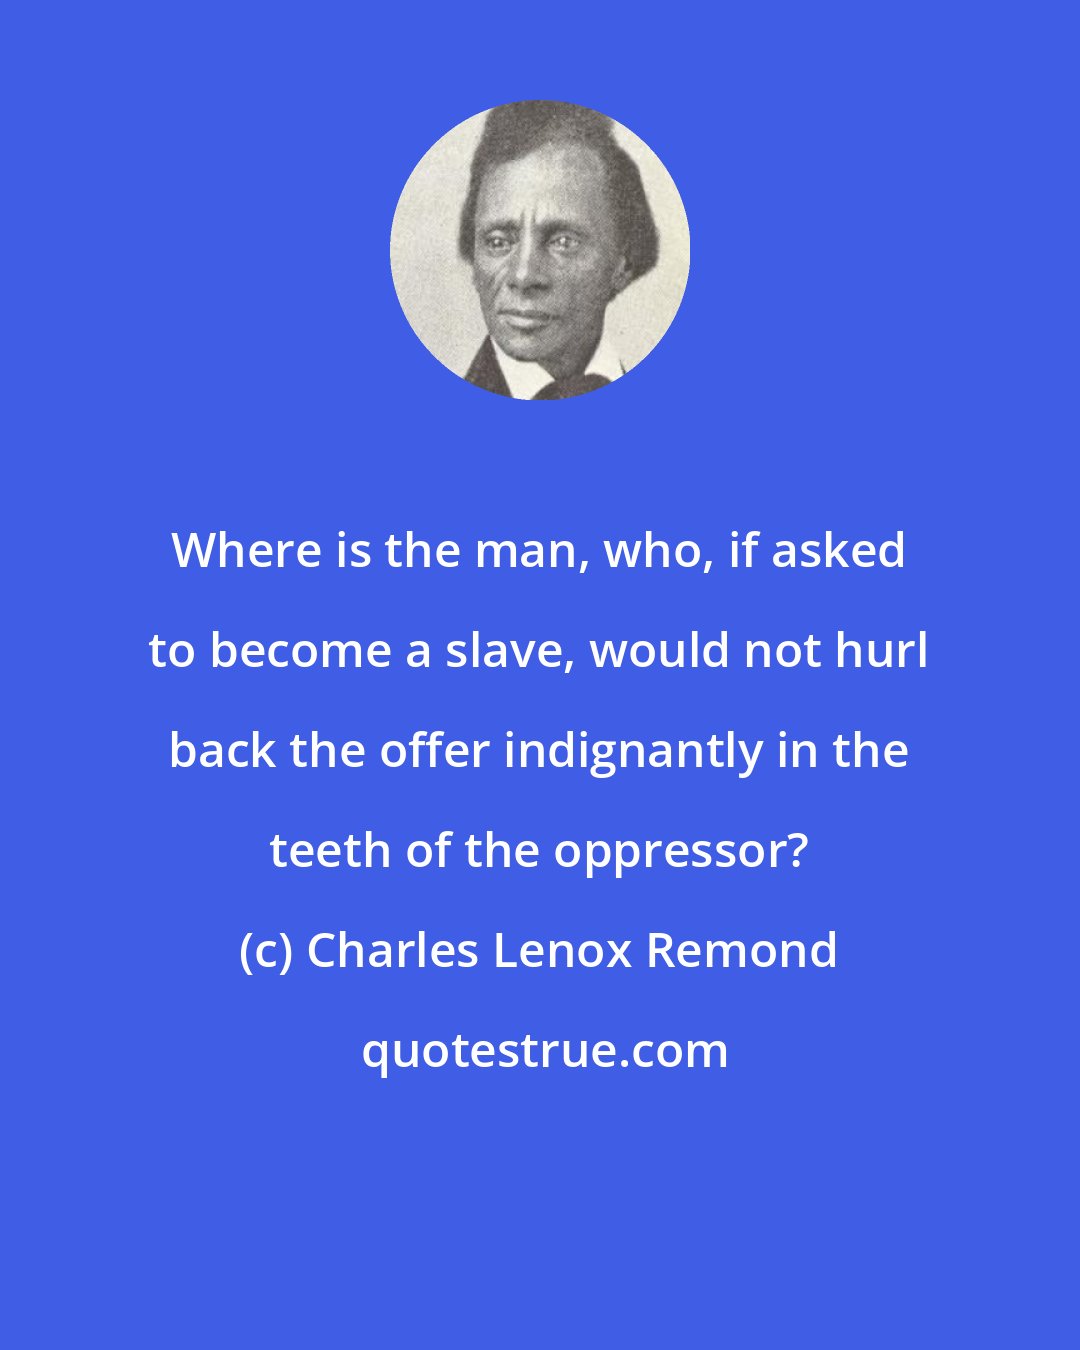 Charles Lenox Remond: Where is the man, who, if asked to become a slave, would not hurl back the offer indignantly in the teeth of the oppressor?